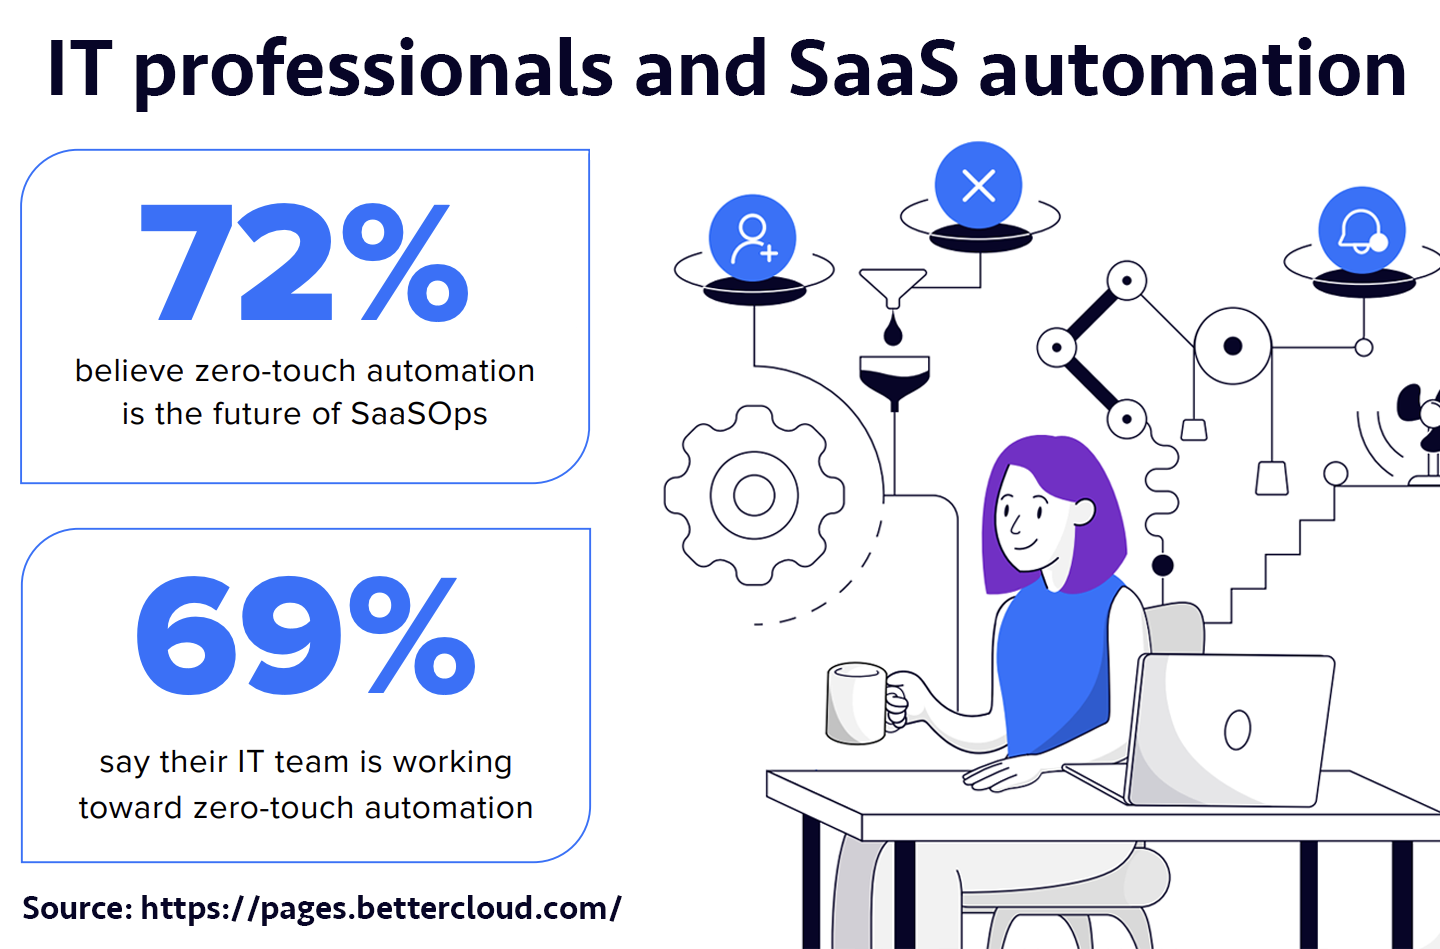 Graphic discussing the future of zero-touch SaaS automation.